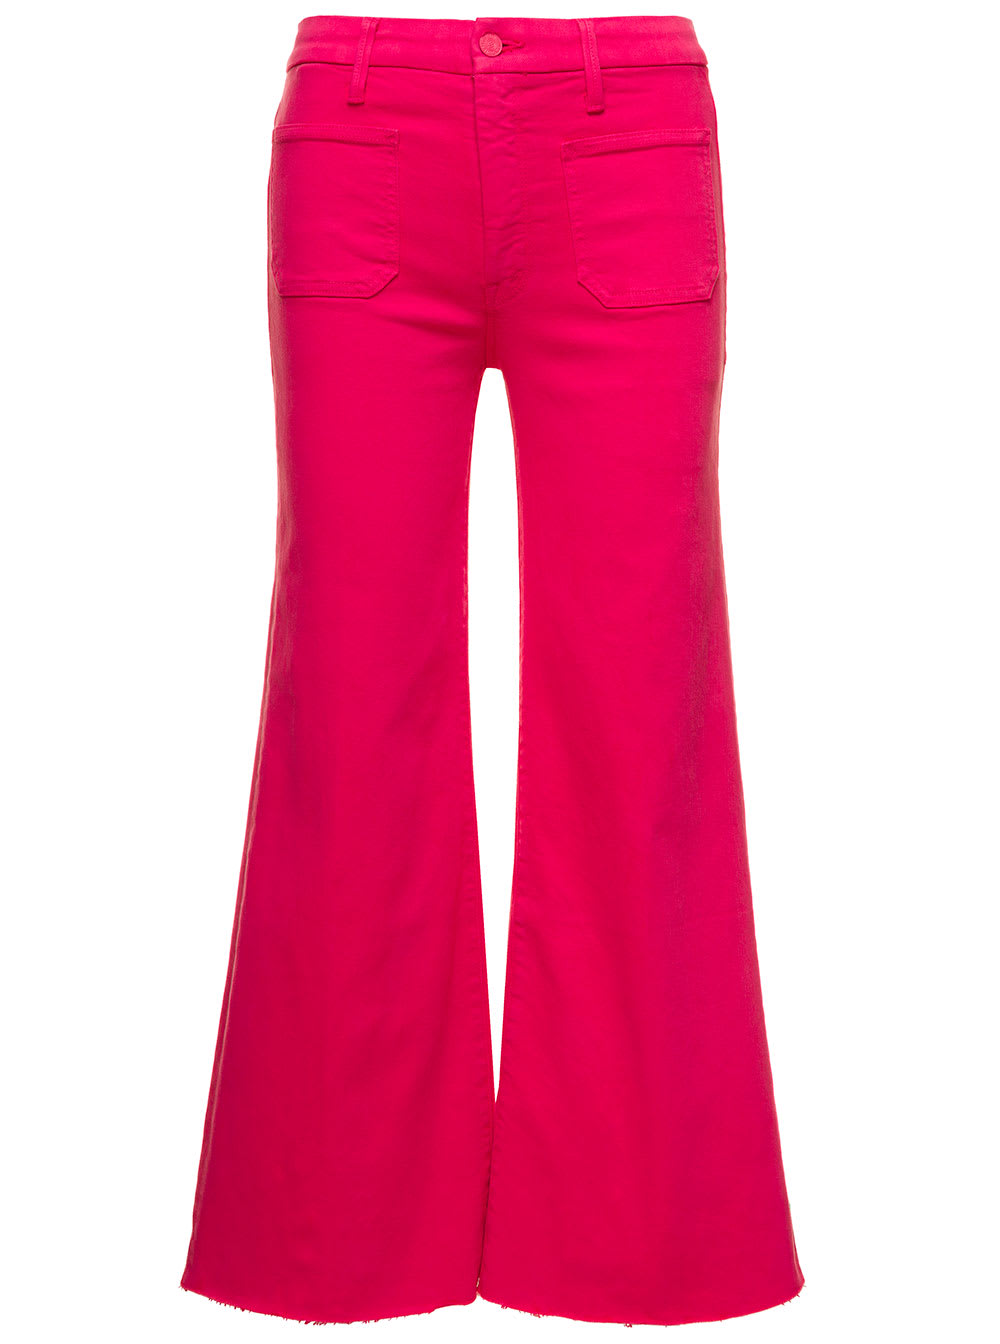 MOTHER FRAY FUCHSIA FLARED JEANS WITH PATCH POCKETS IN COTTON DENIM WOMAN